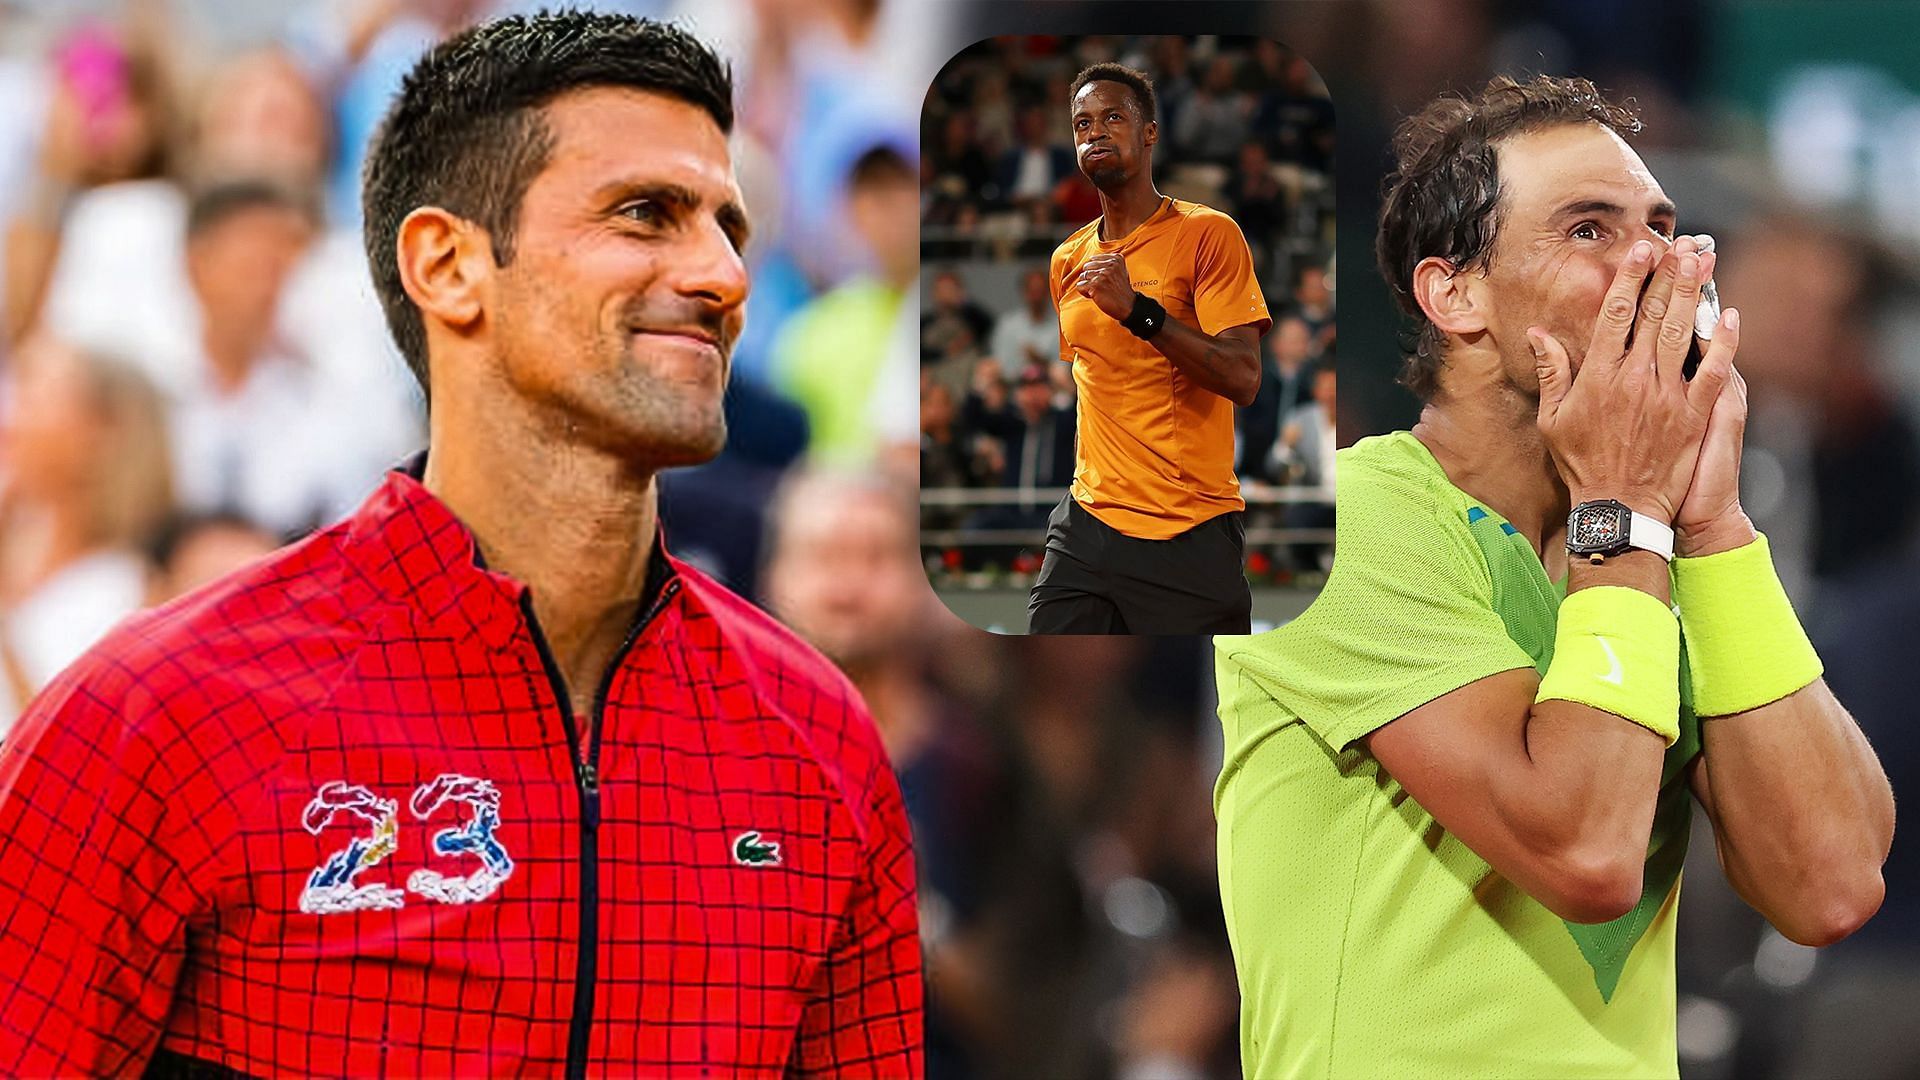 Novak Djokovic surpasses Rafael Nadal, creates record for biggest undefeated head-to-head after 19th consecutive win over Gael Monfils